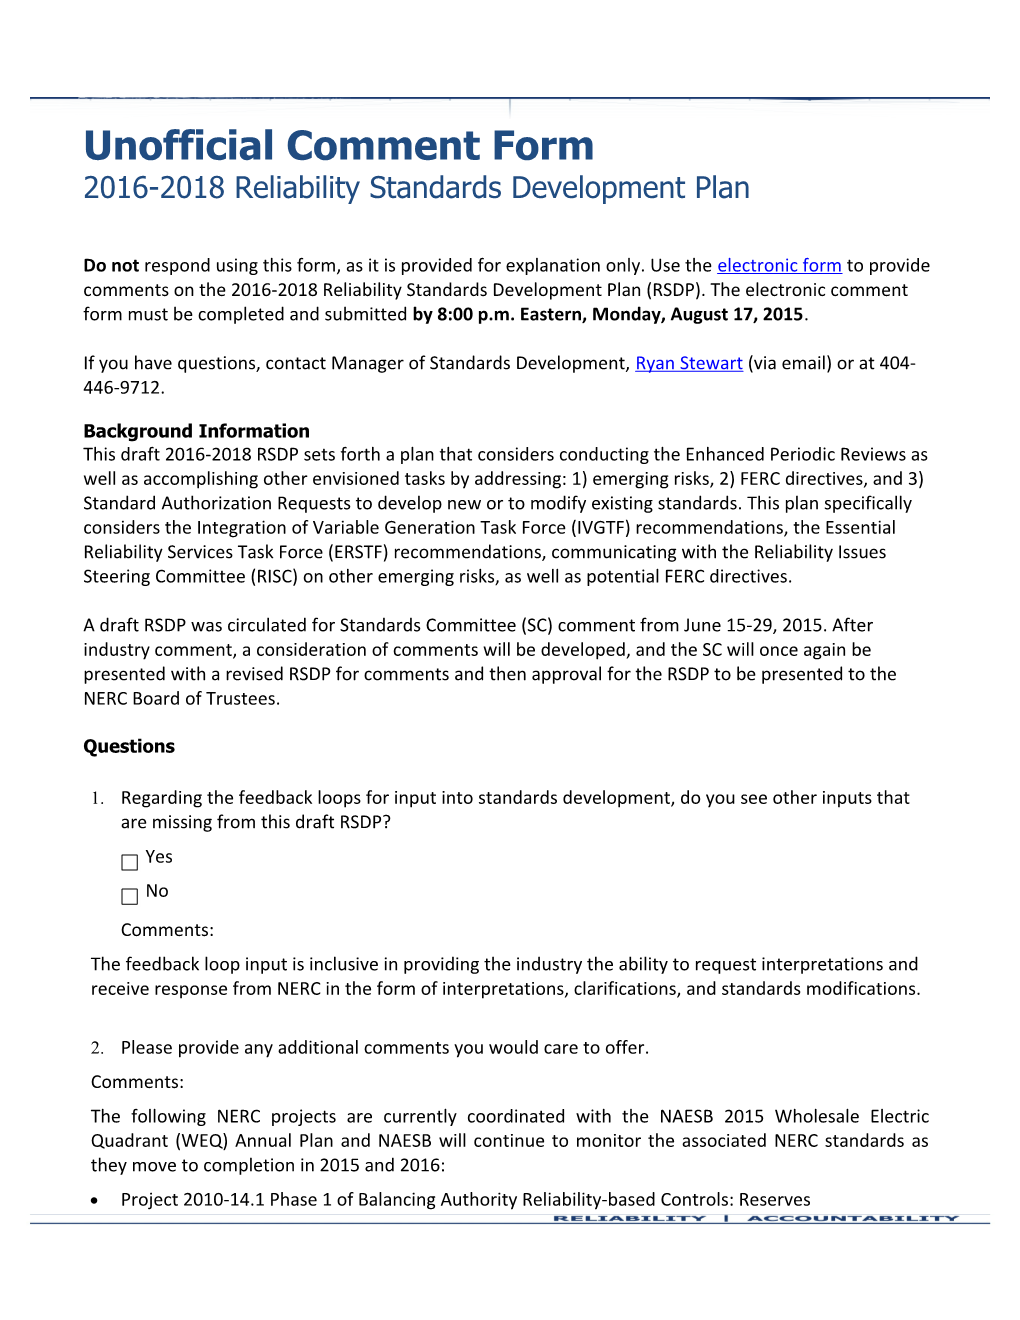 2015 Project for Updating Reliability Standards Development Plan: 2016-2018 Related Files